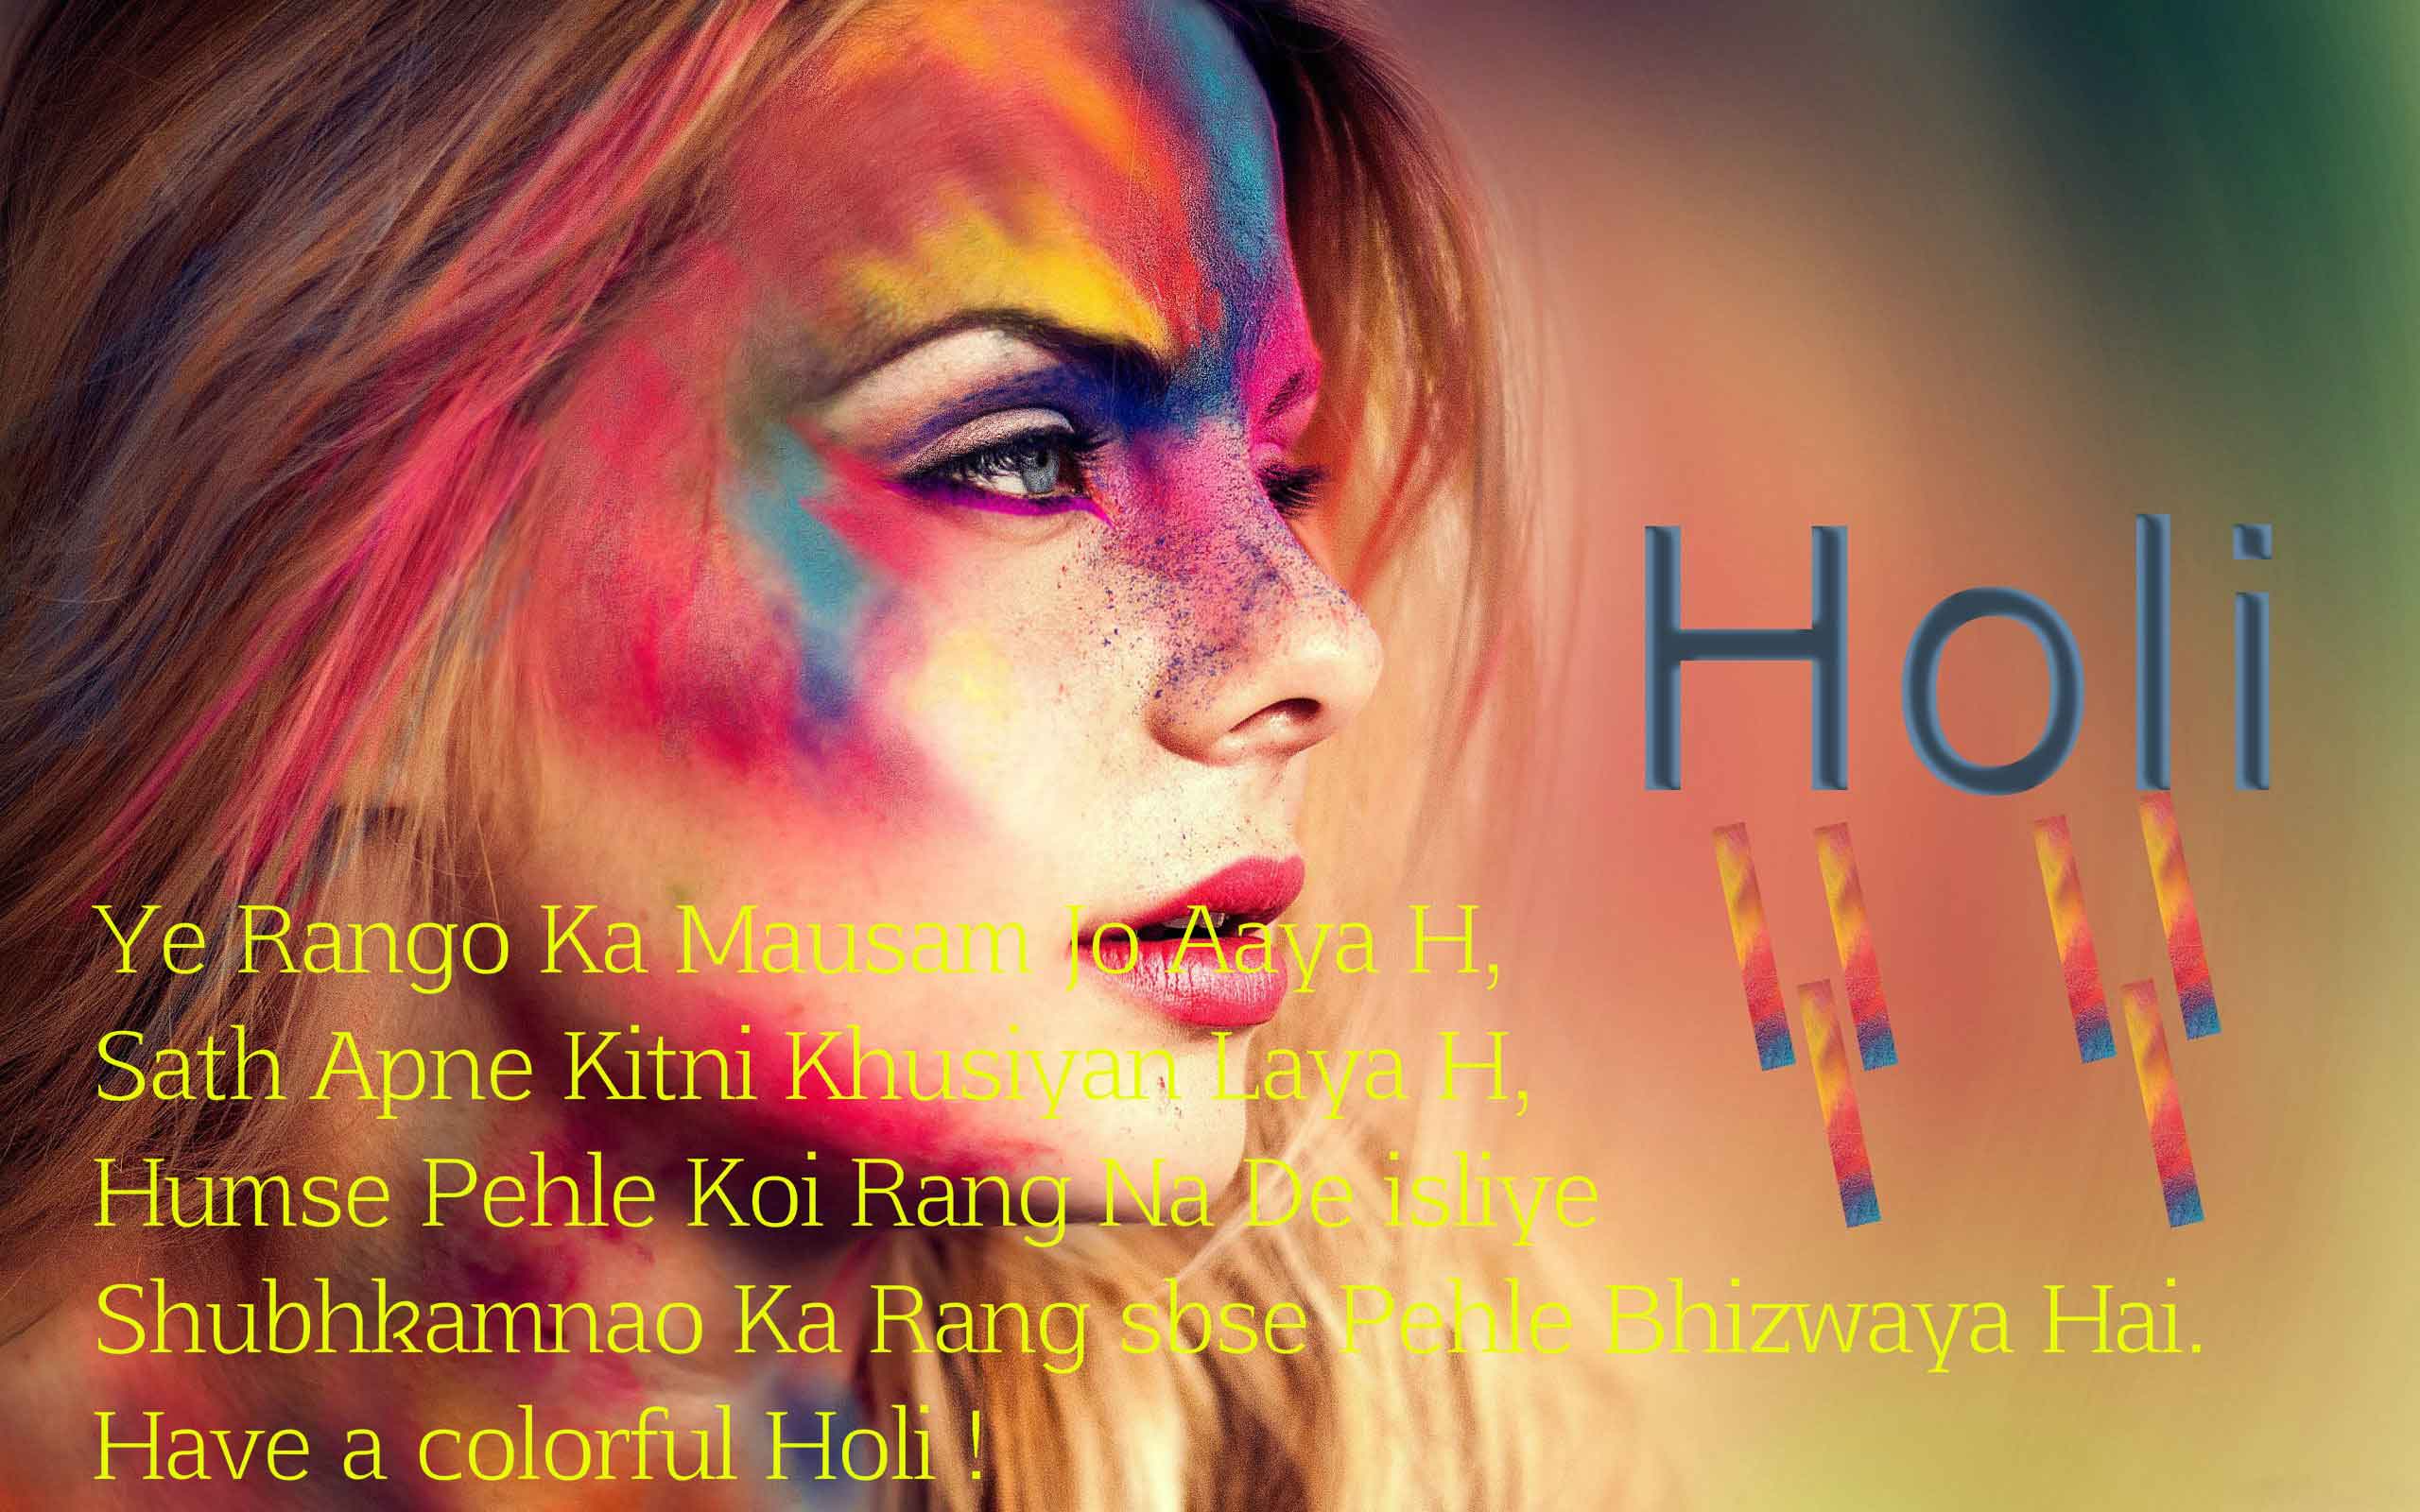 Holi Festival Wishes 2018 - Images, Wall Papers, SMS, Quotes, Songs, Status